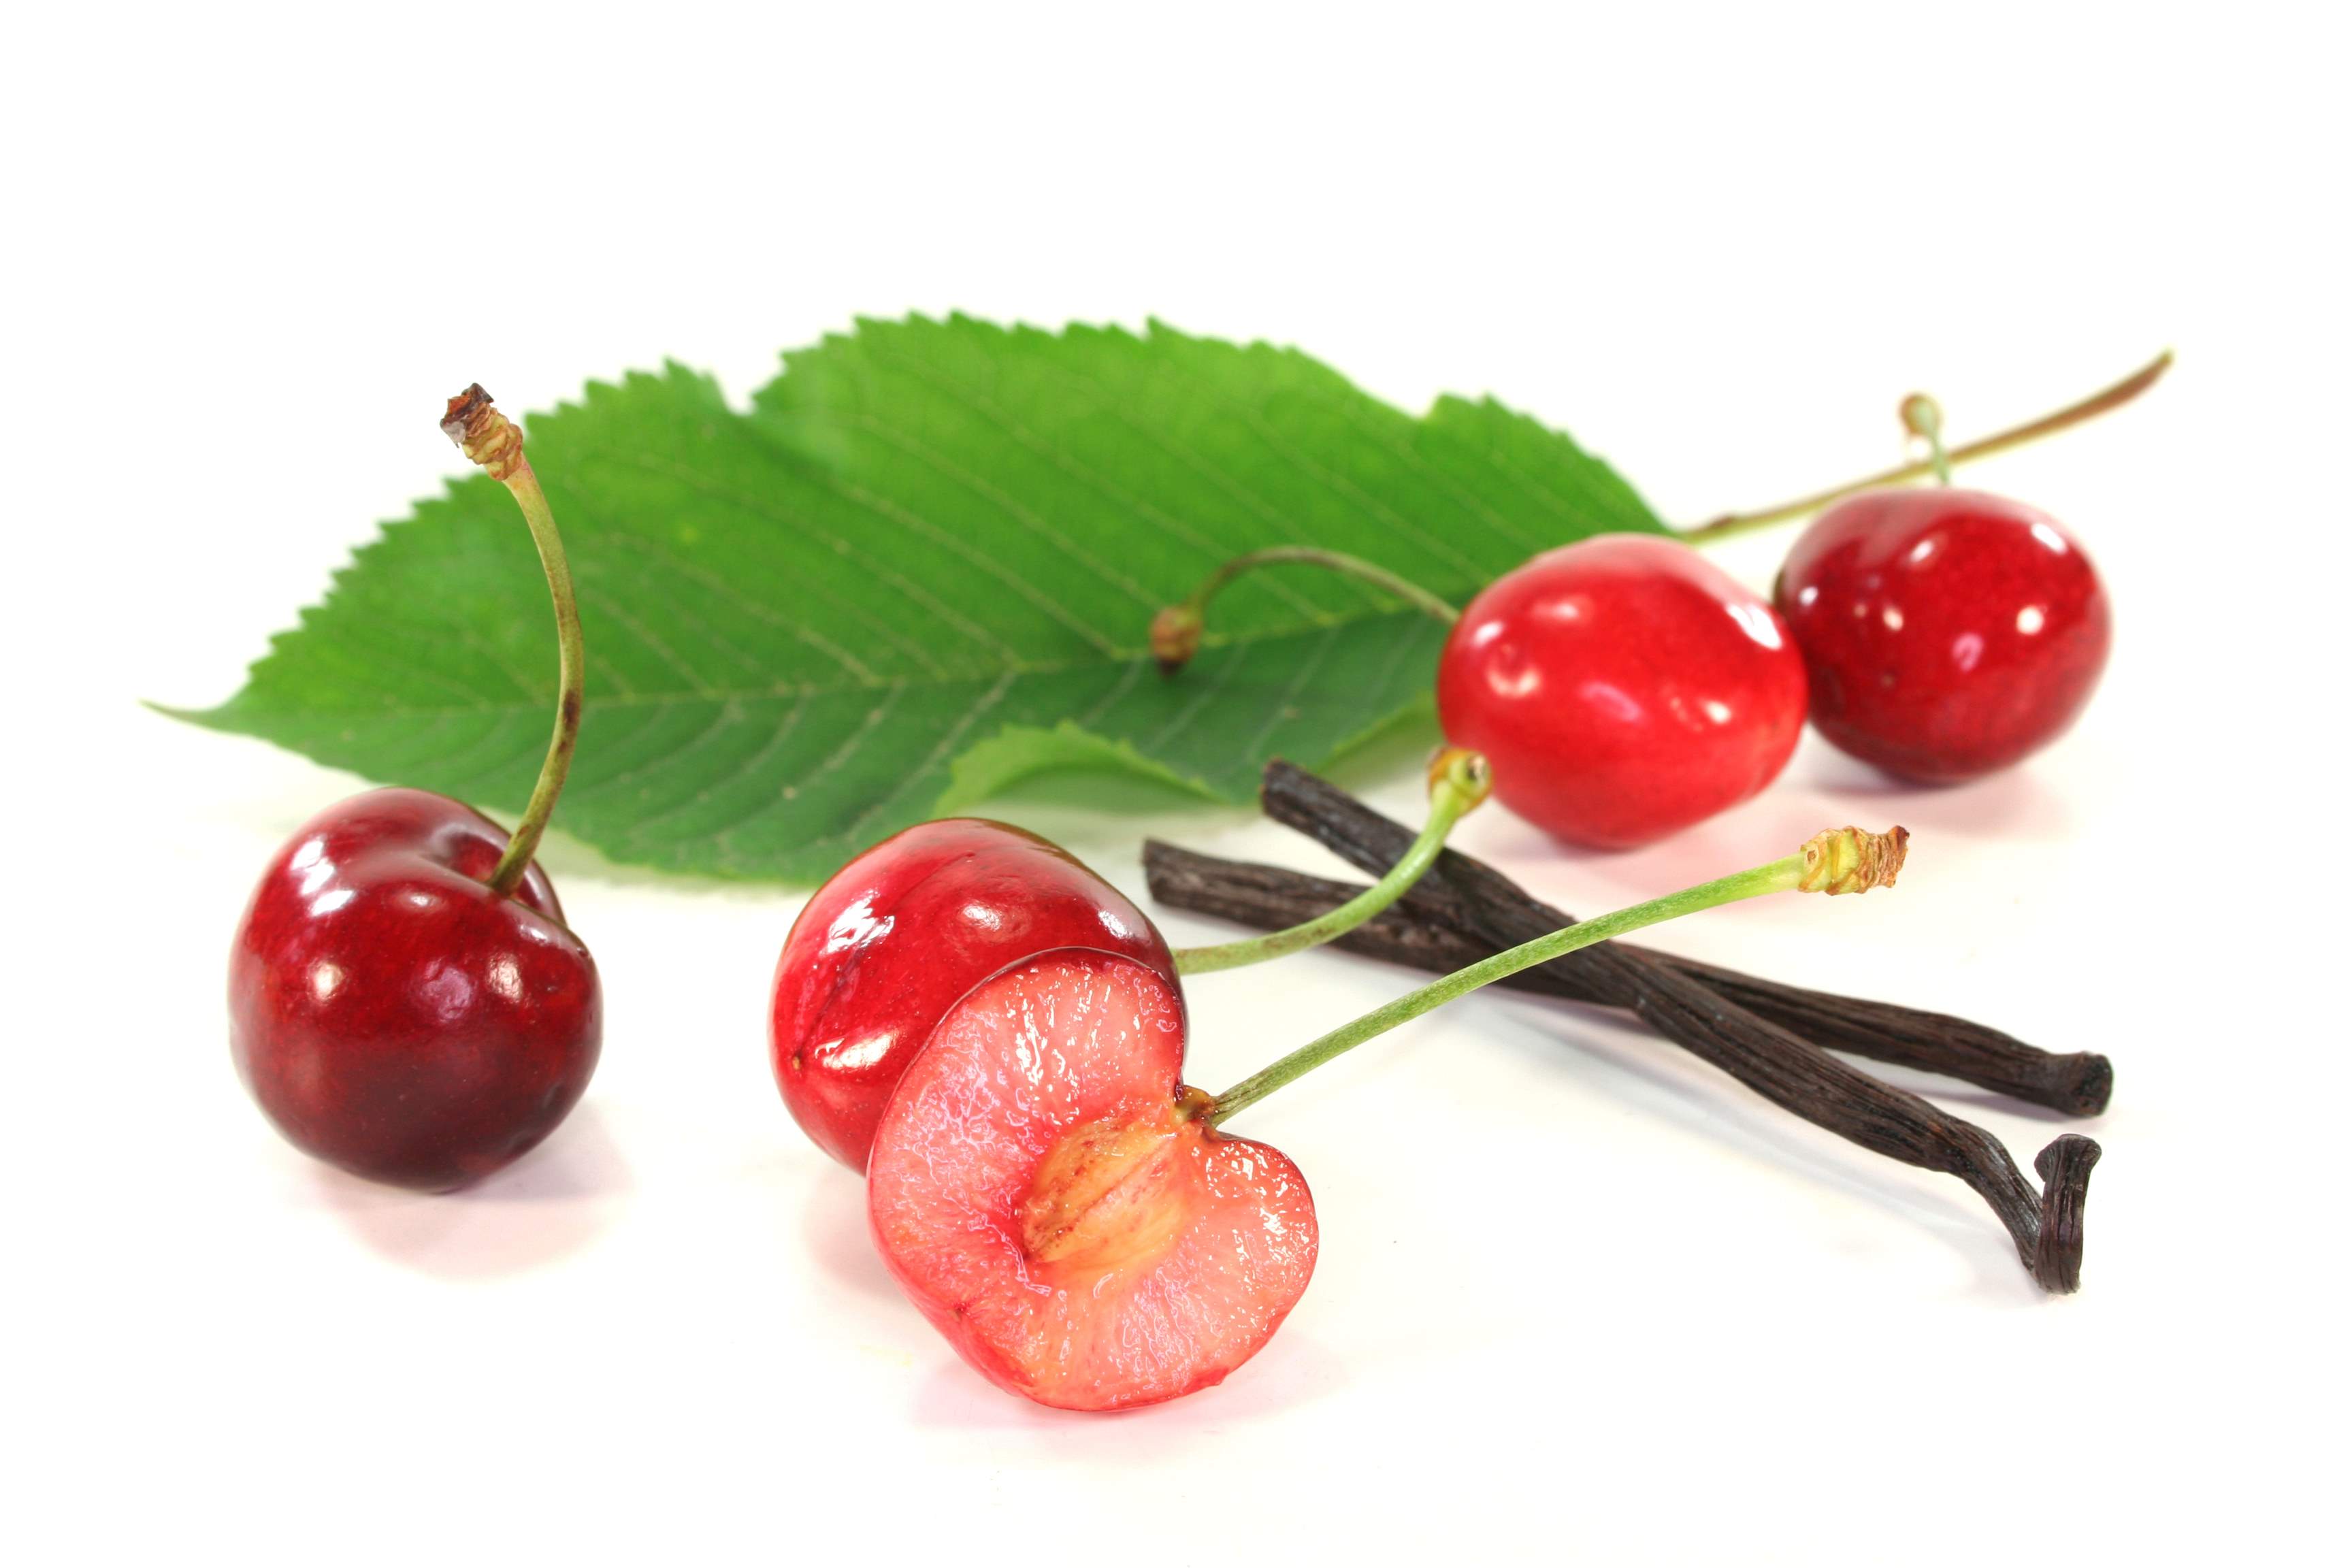 How Do You Prepare A Cherry Seed For Planting?